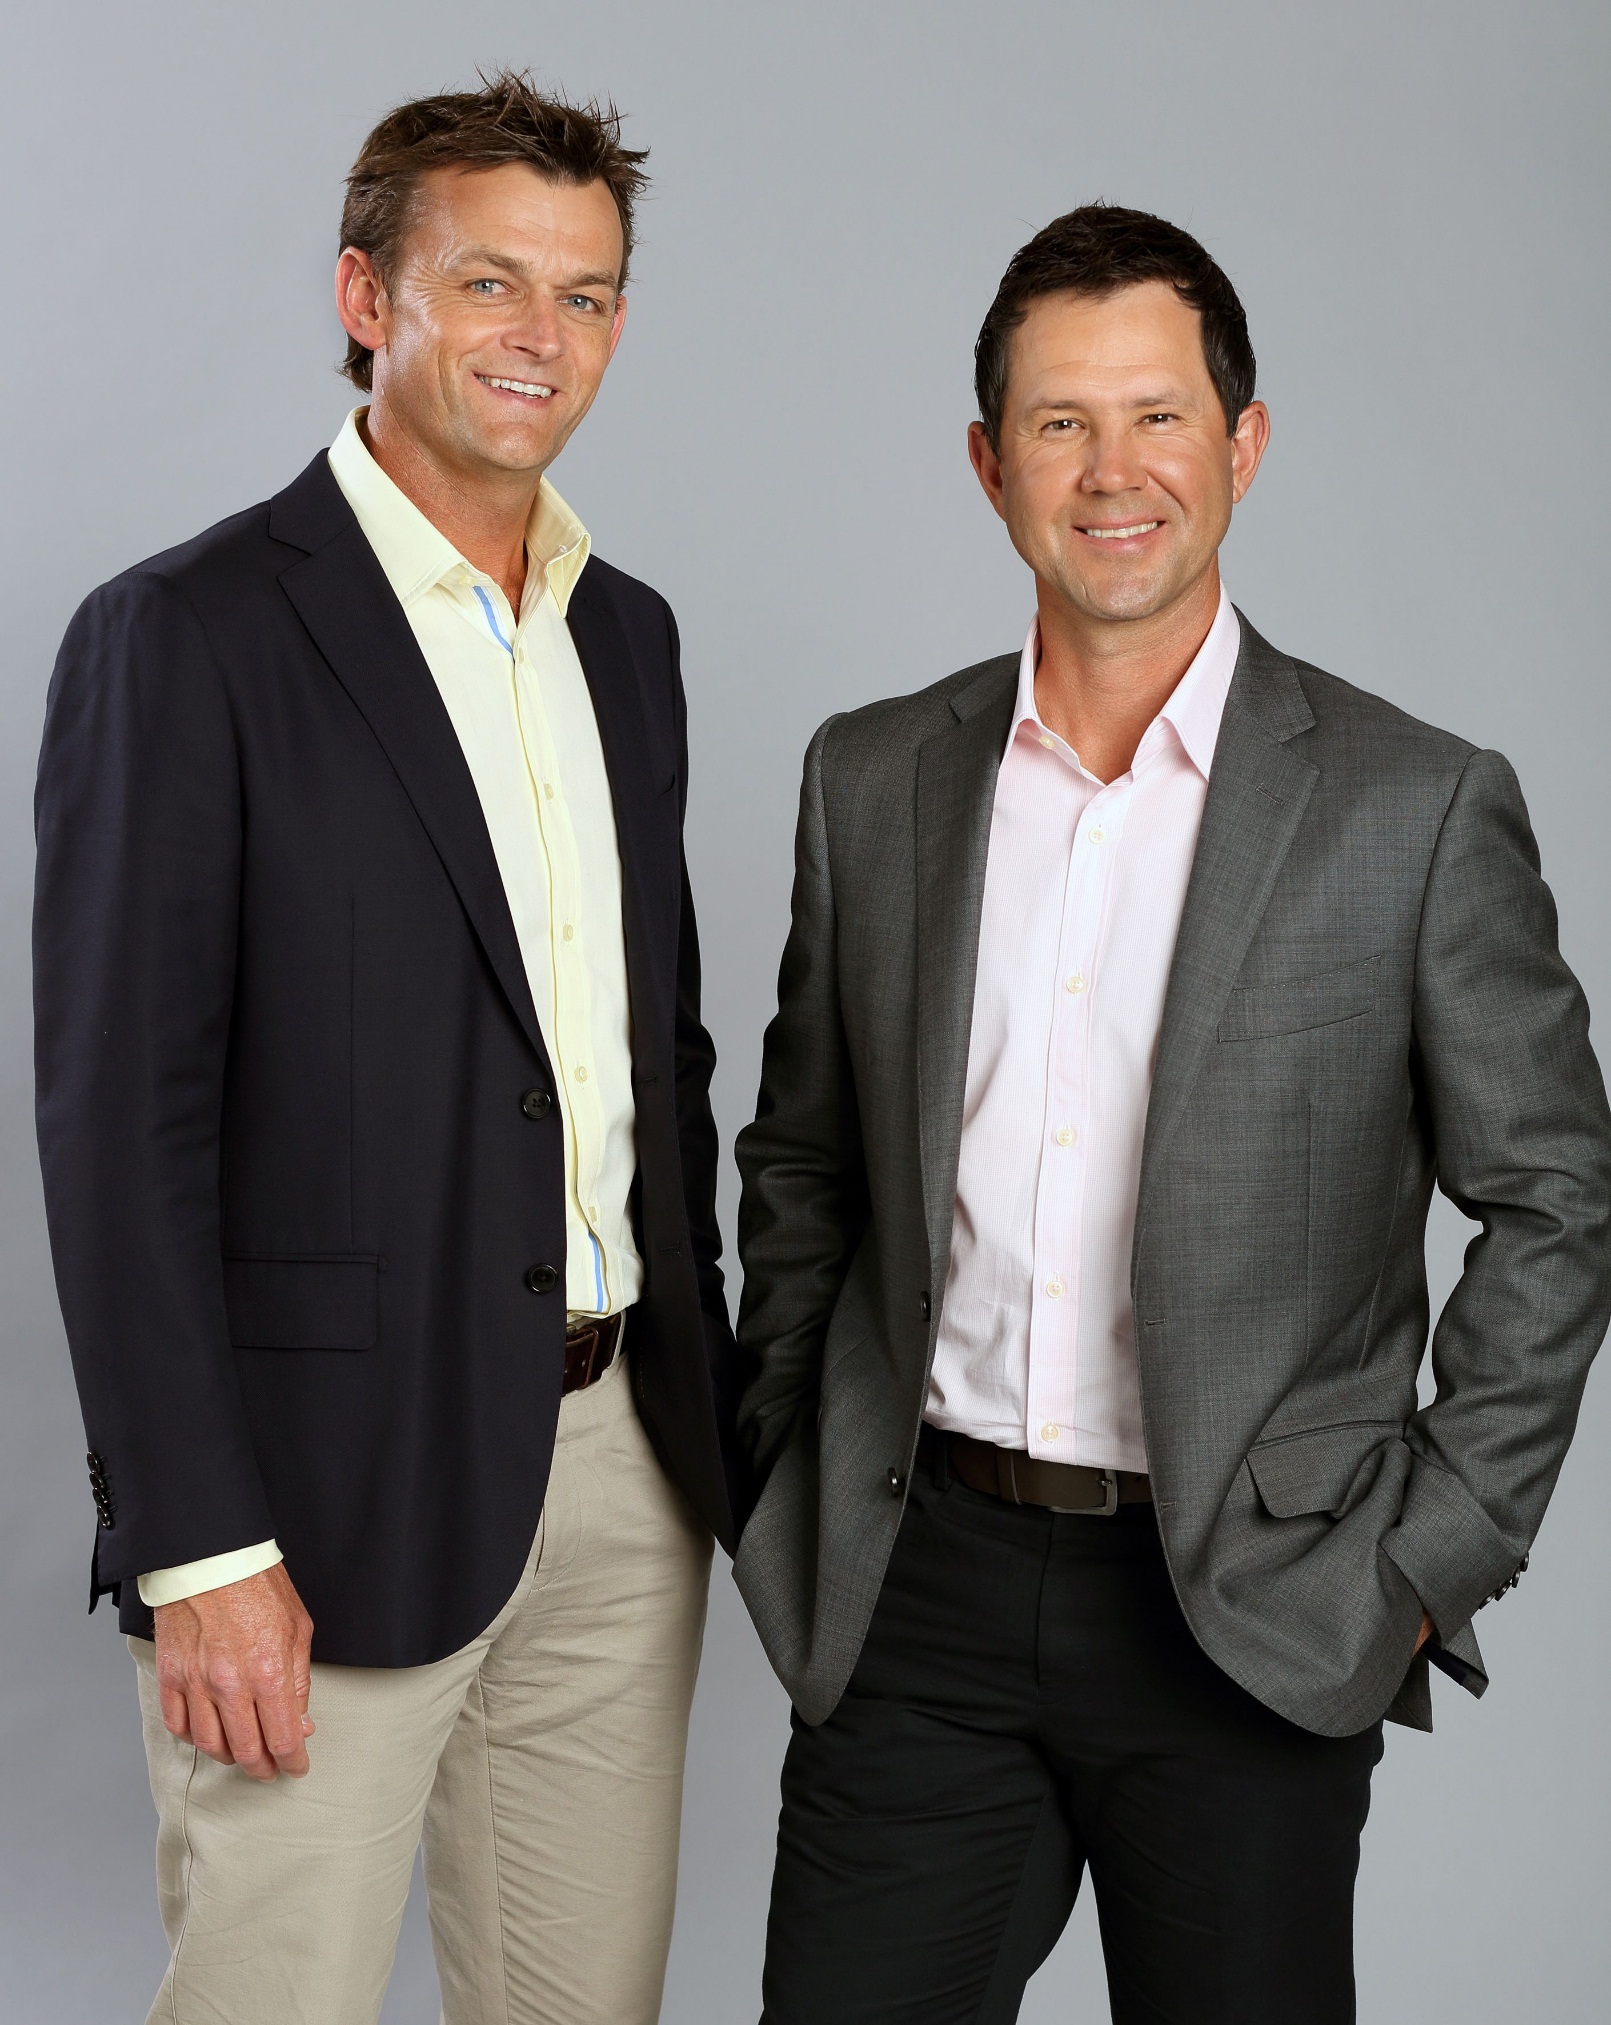   Adam Gilchrist and Ricky Ponting  image supplied 